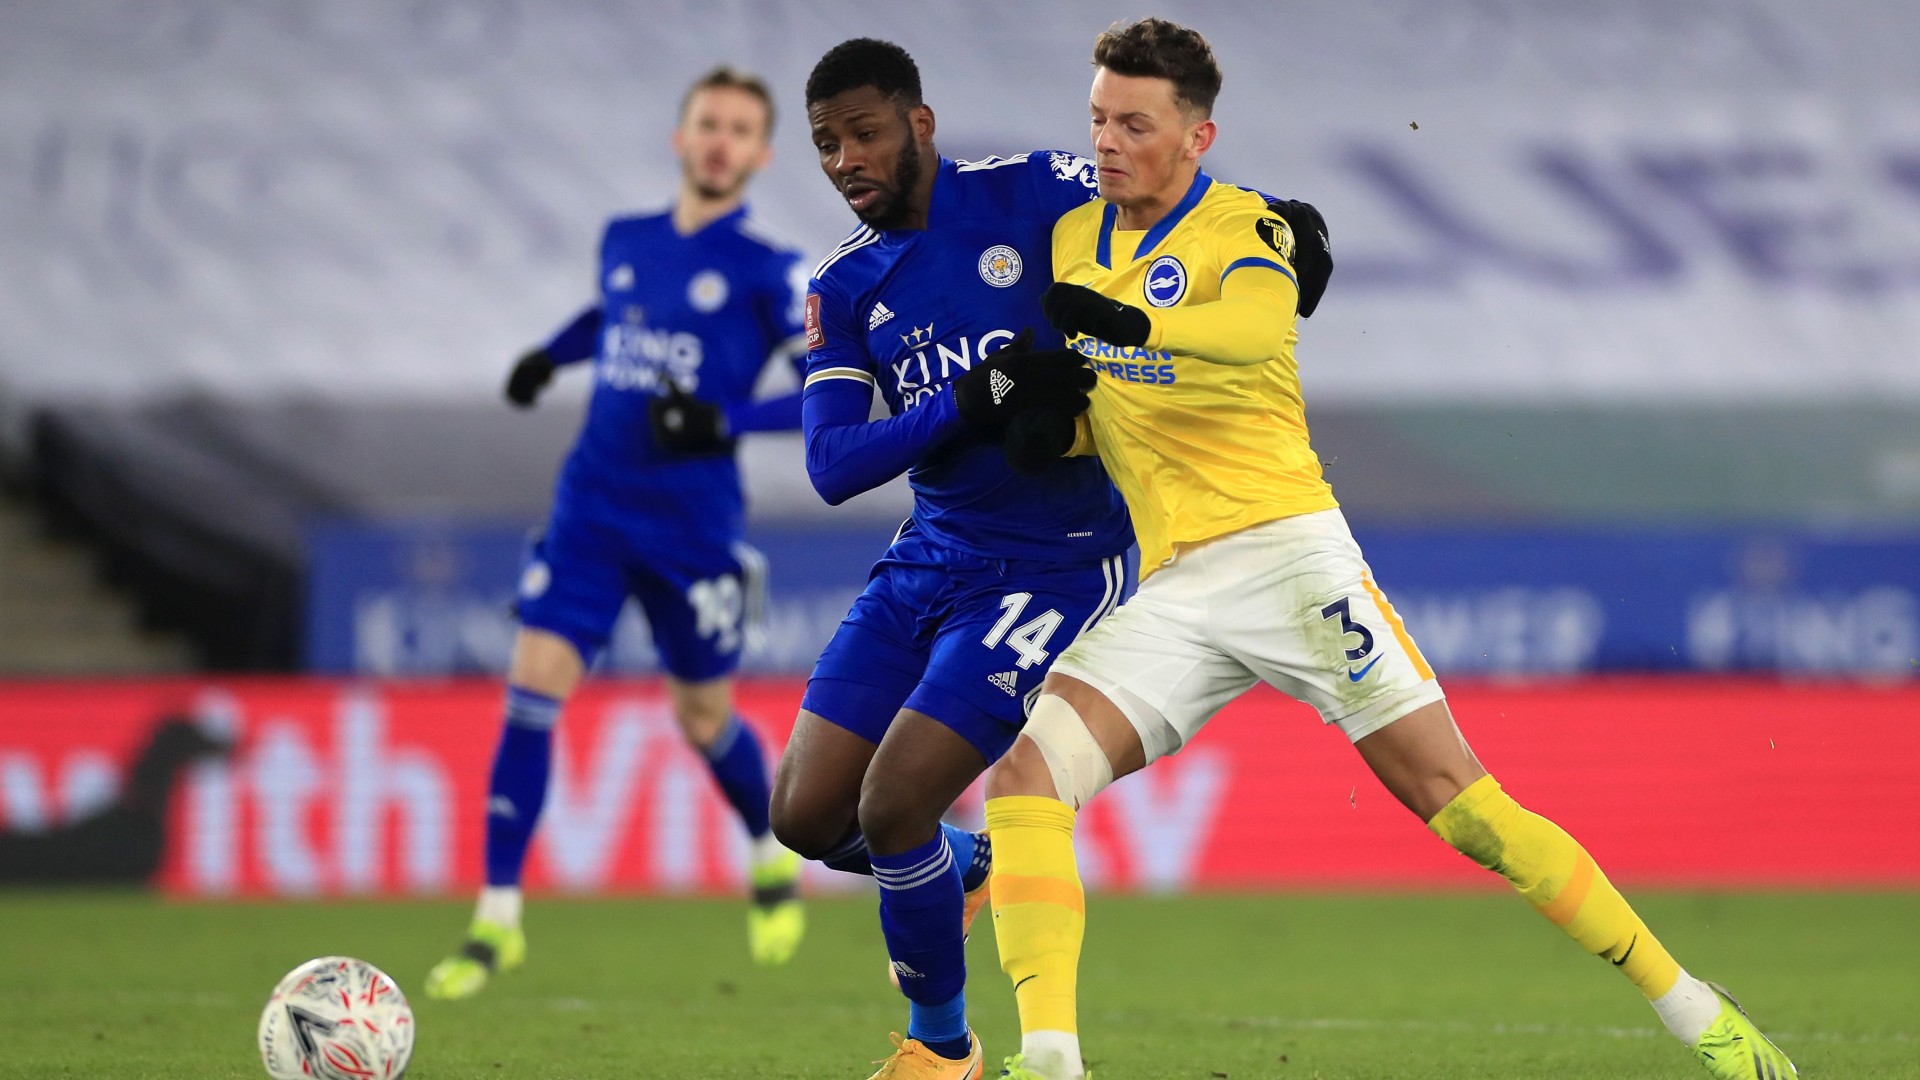 ‘It was too cold for extra-time’ – Iheanacho thrilled to lead Leicester City past Brighton & Hove Albion